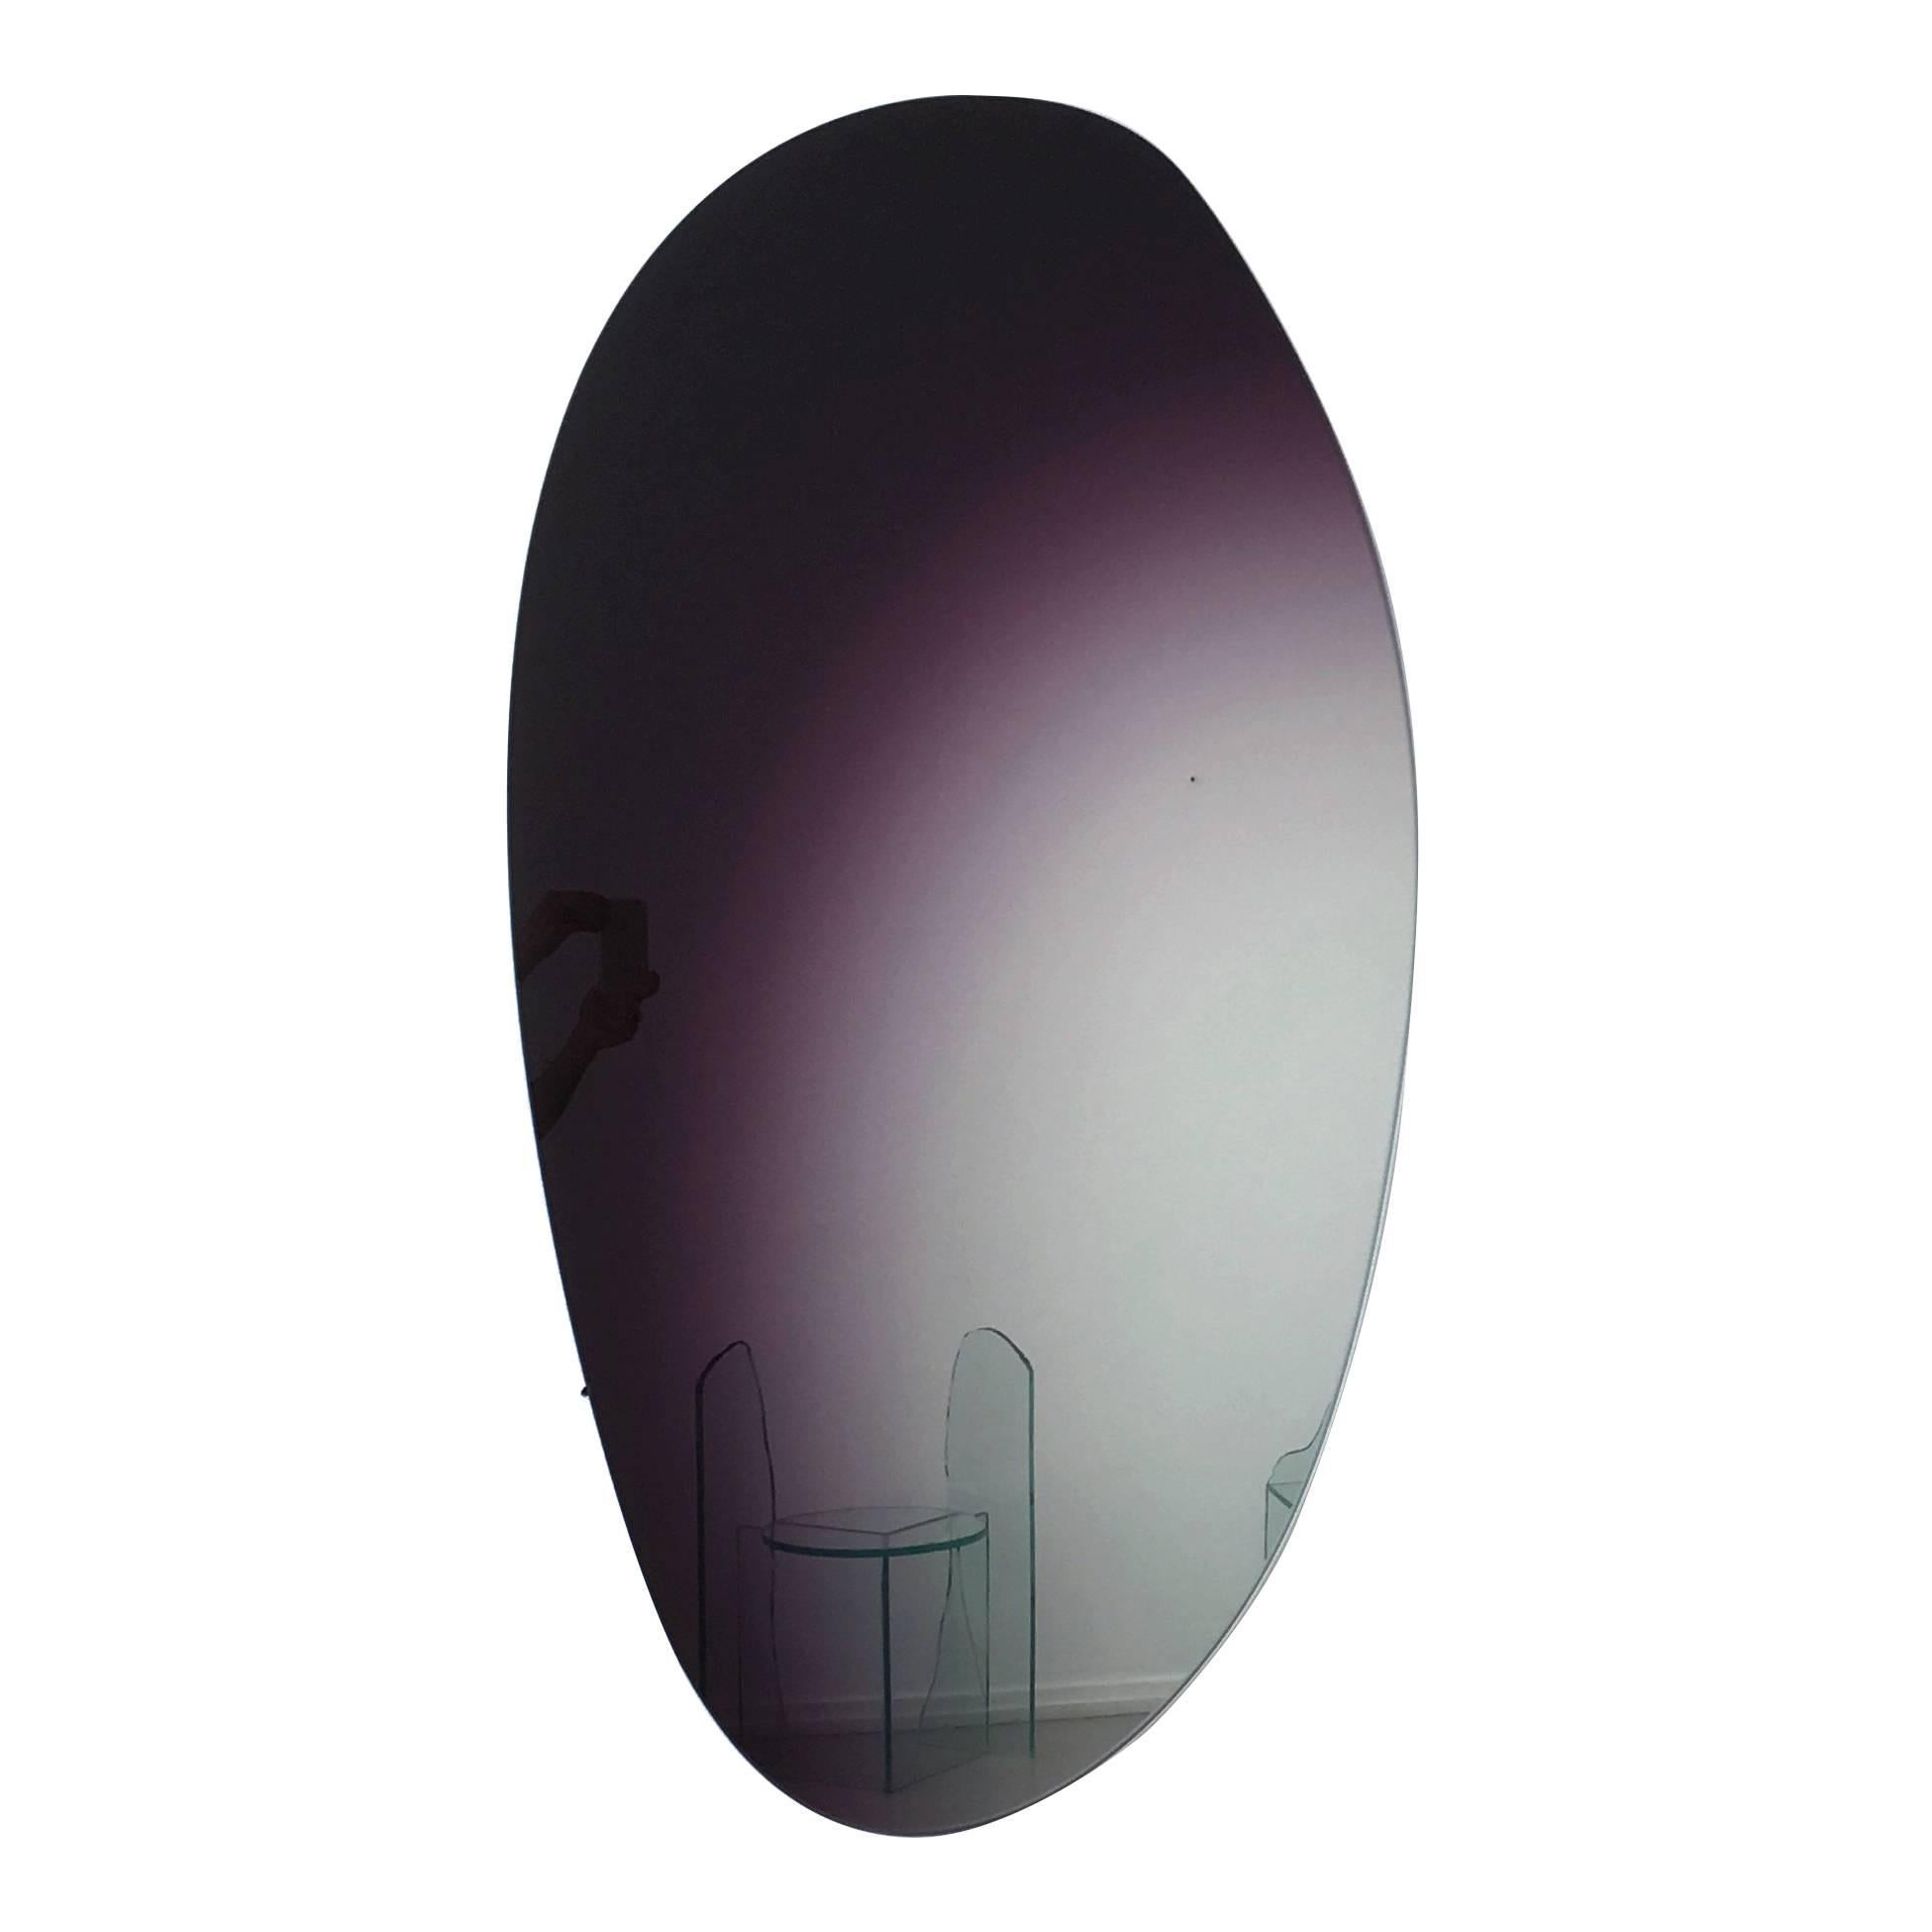 Contemporary Off Round Hue Wall Mirror #2, by Sabine Marcelis